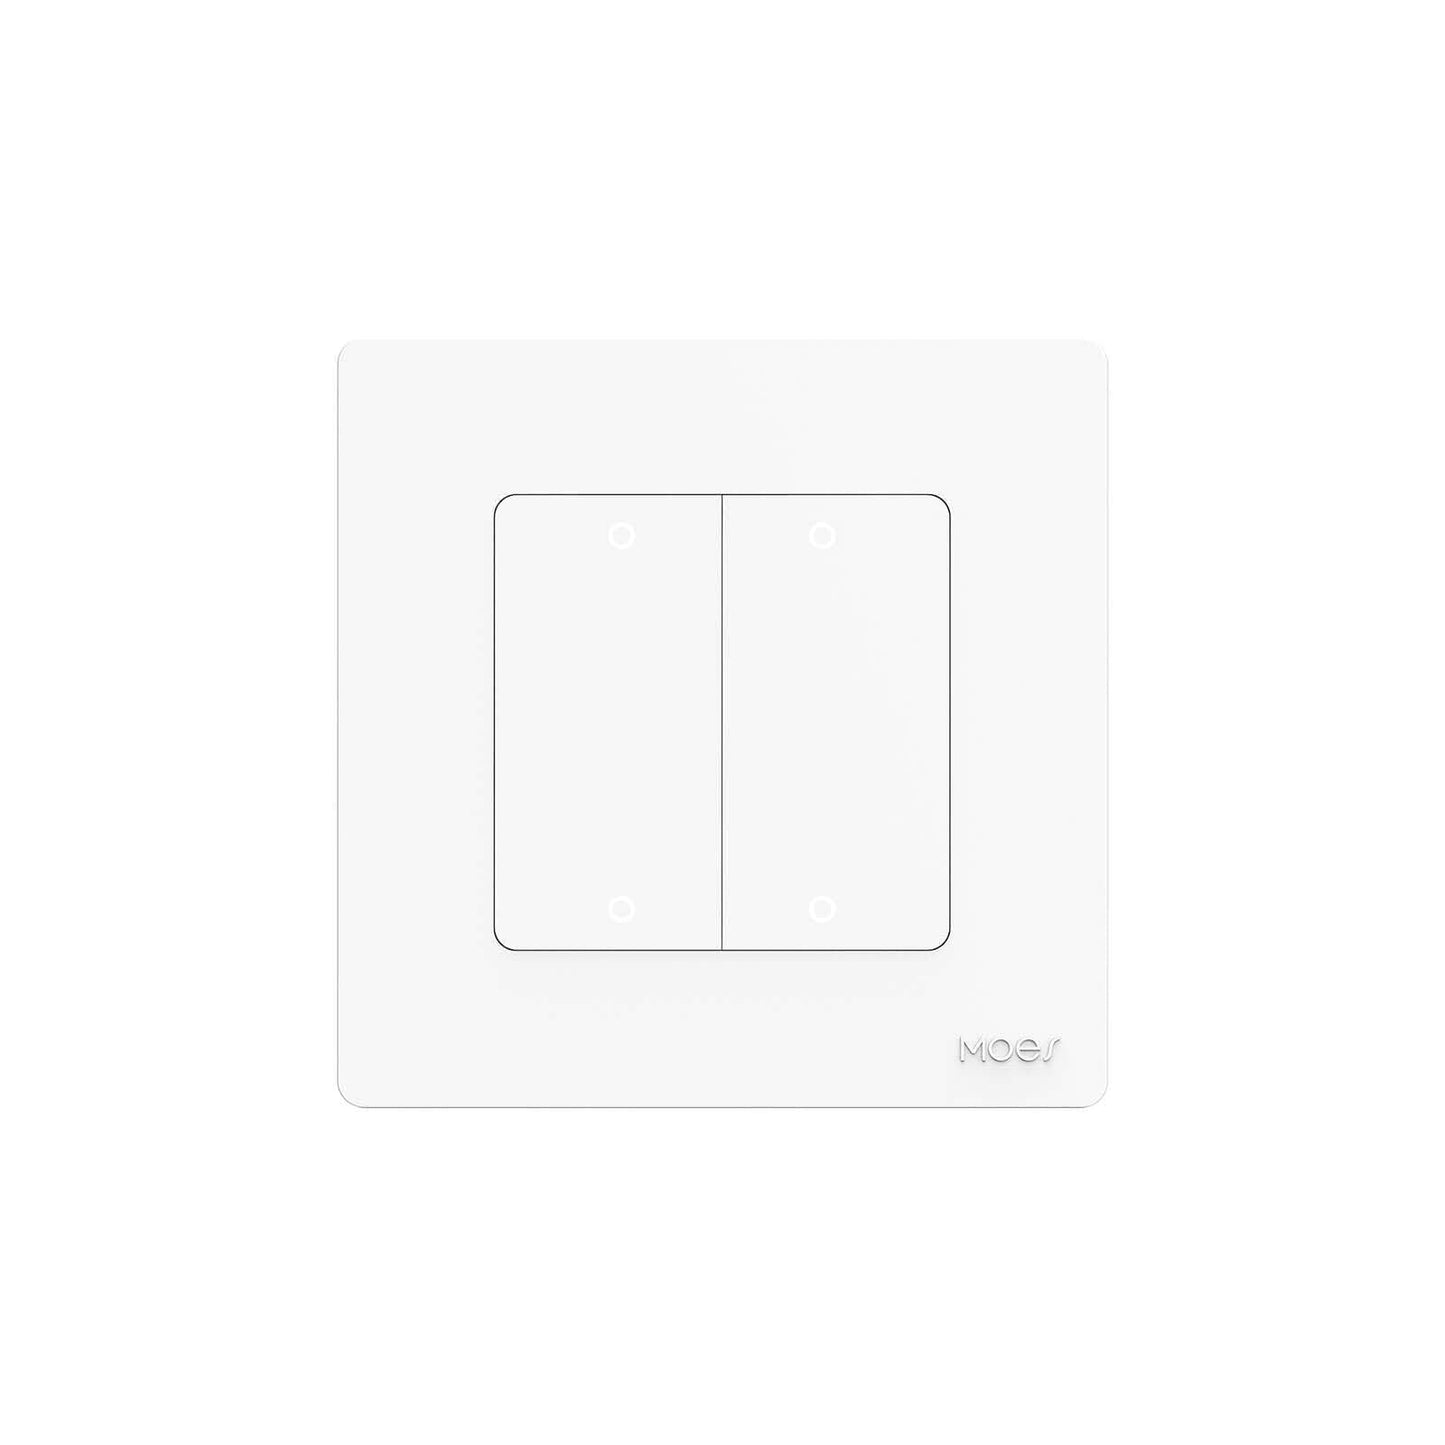 MOES New Star Ring Smart ZigBee3.0 Push Button Switch Embedded Light Touch Switch/ Scene Switch - MOES